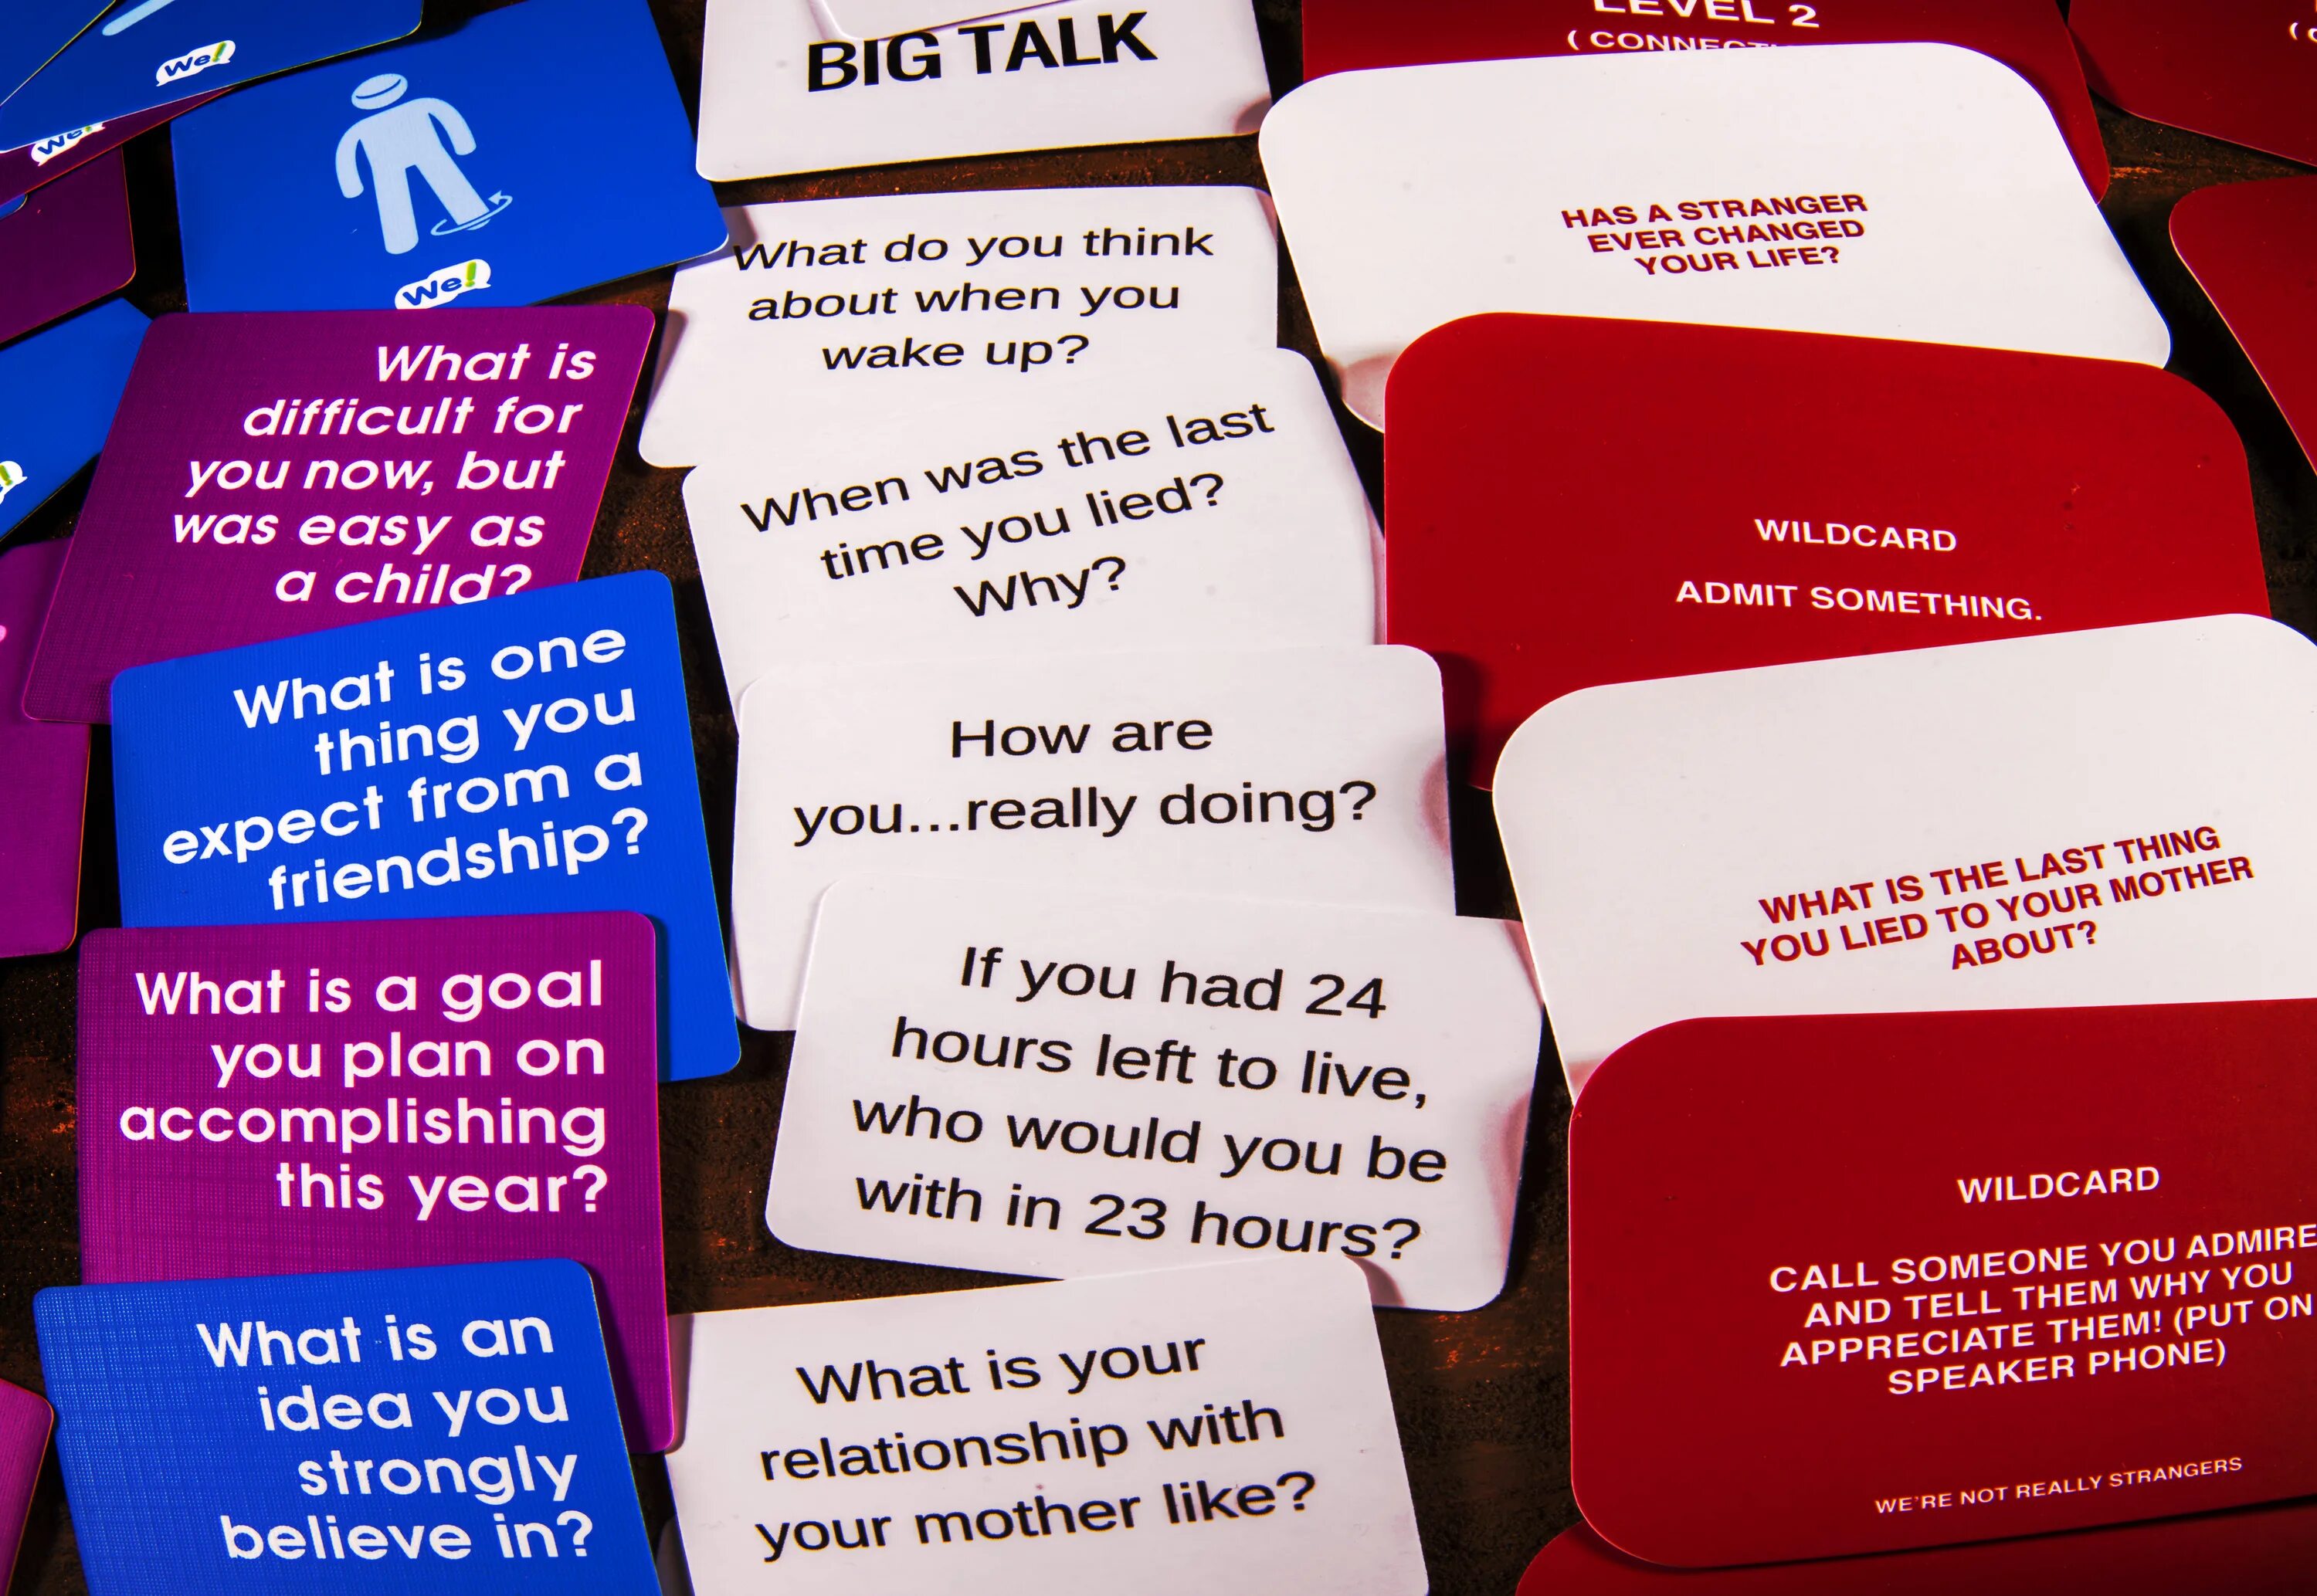 Card talk. The game we are not really strangers. Big writing: talk the big talk. Hot game Cards обзор. To talk big.